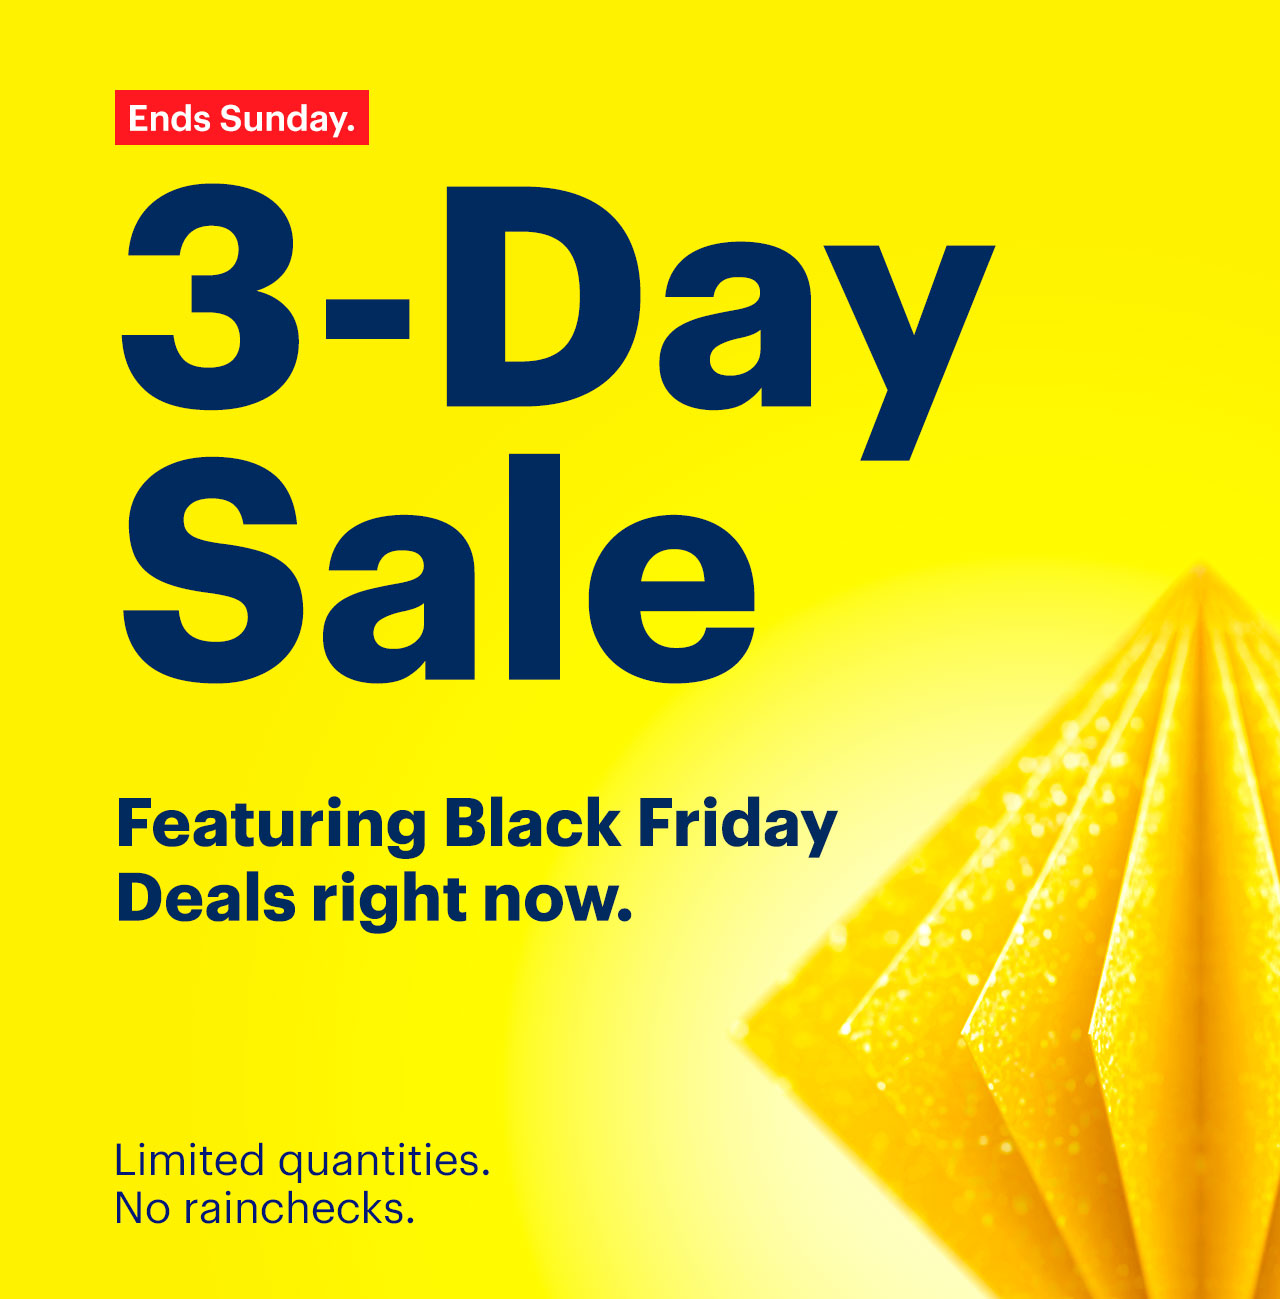 3-Day Sale featuring Black Friday Deals right now.